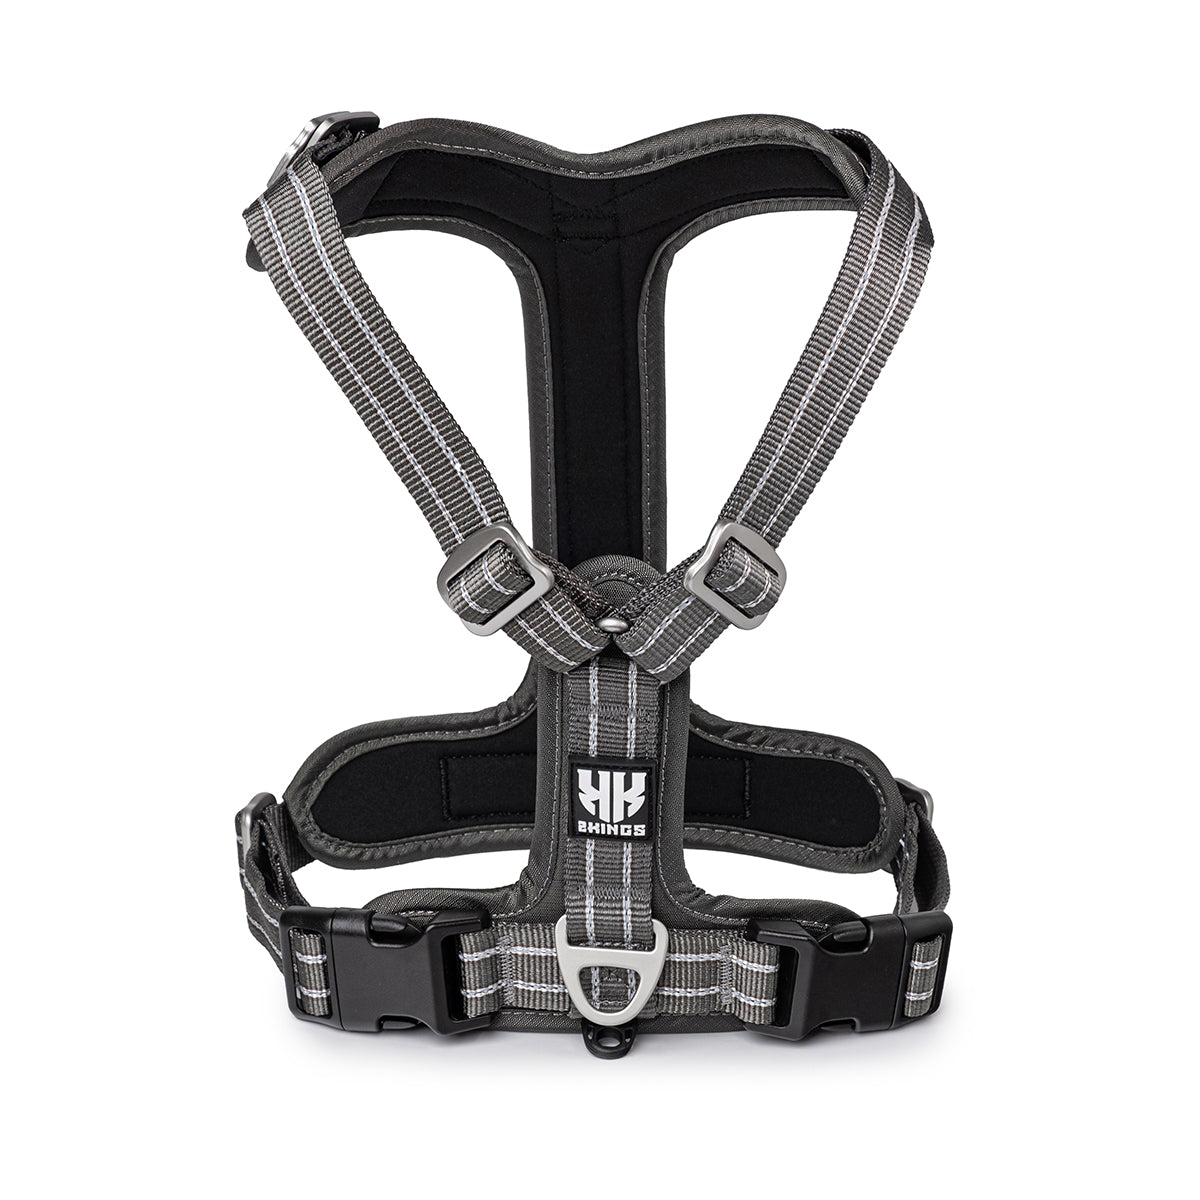 Adjustable Dog Harness with Double-Handed Lead Set - Lightweight & Reflective -Grey.